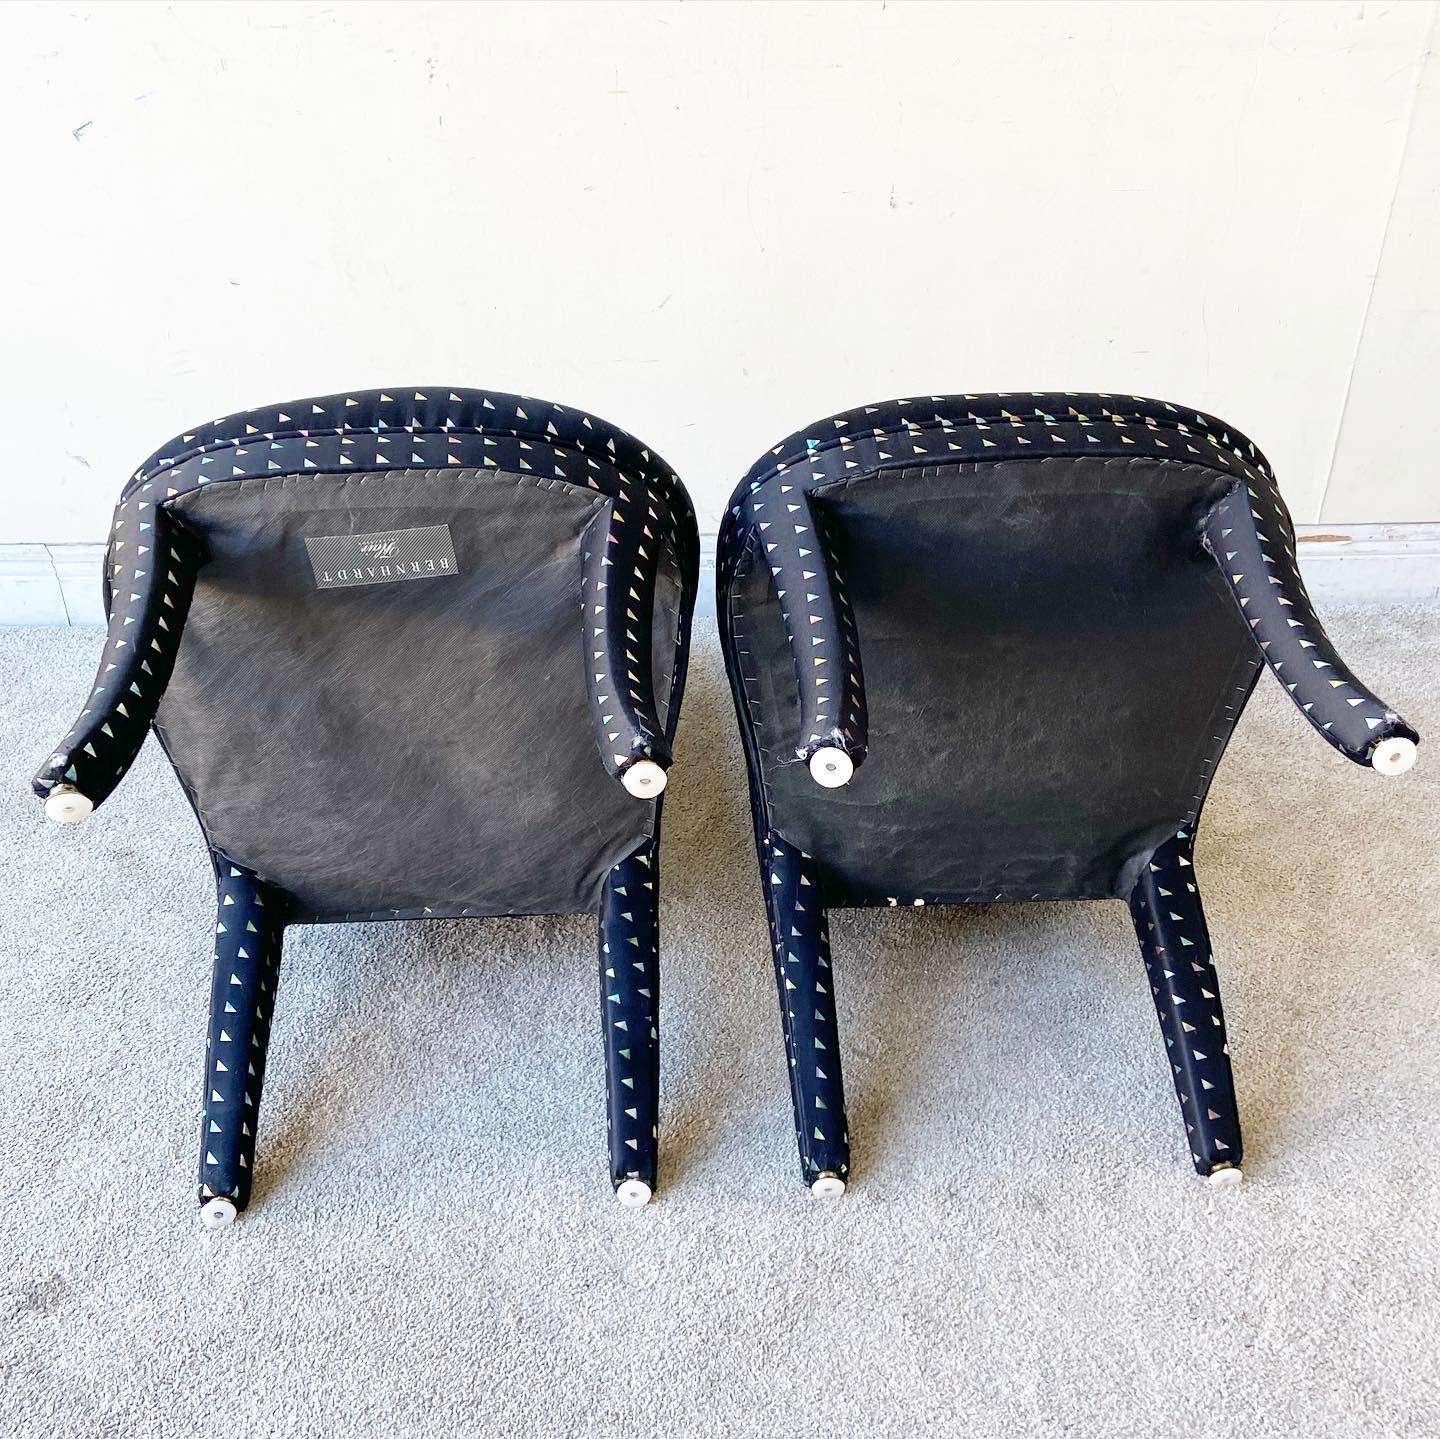 Postmodern Black With Colored Triangles Dining Chairs by Bernhardt- 6 Chairs In Good Condition For Sale In Delray Beach, FL